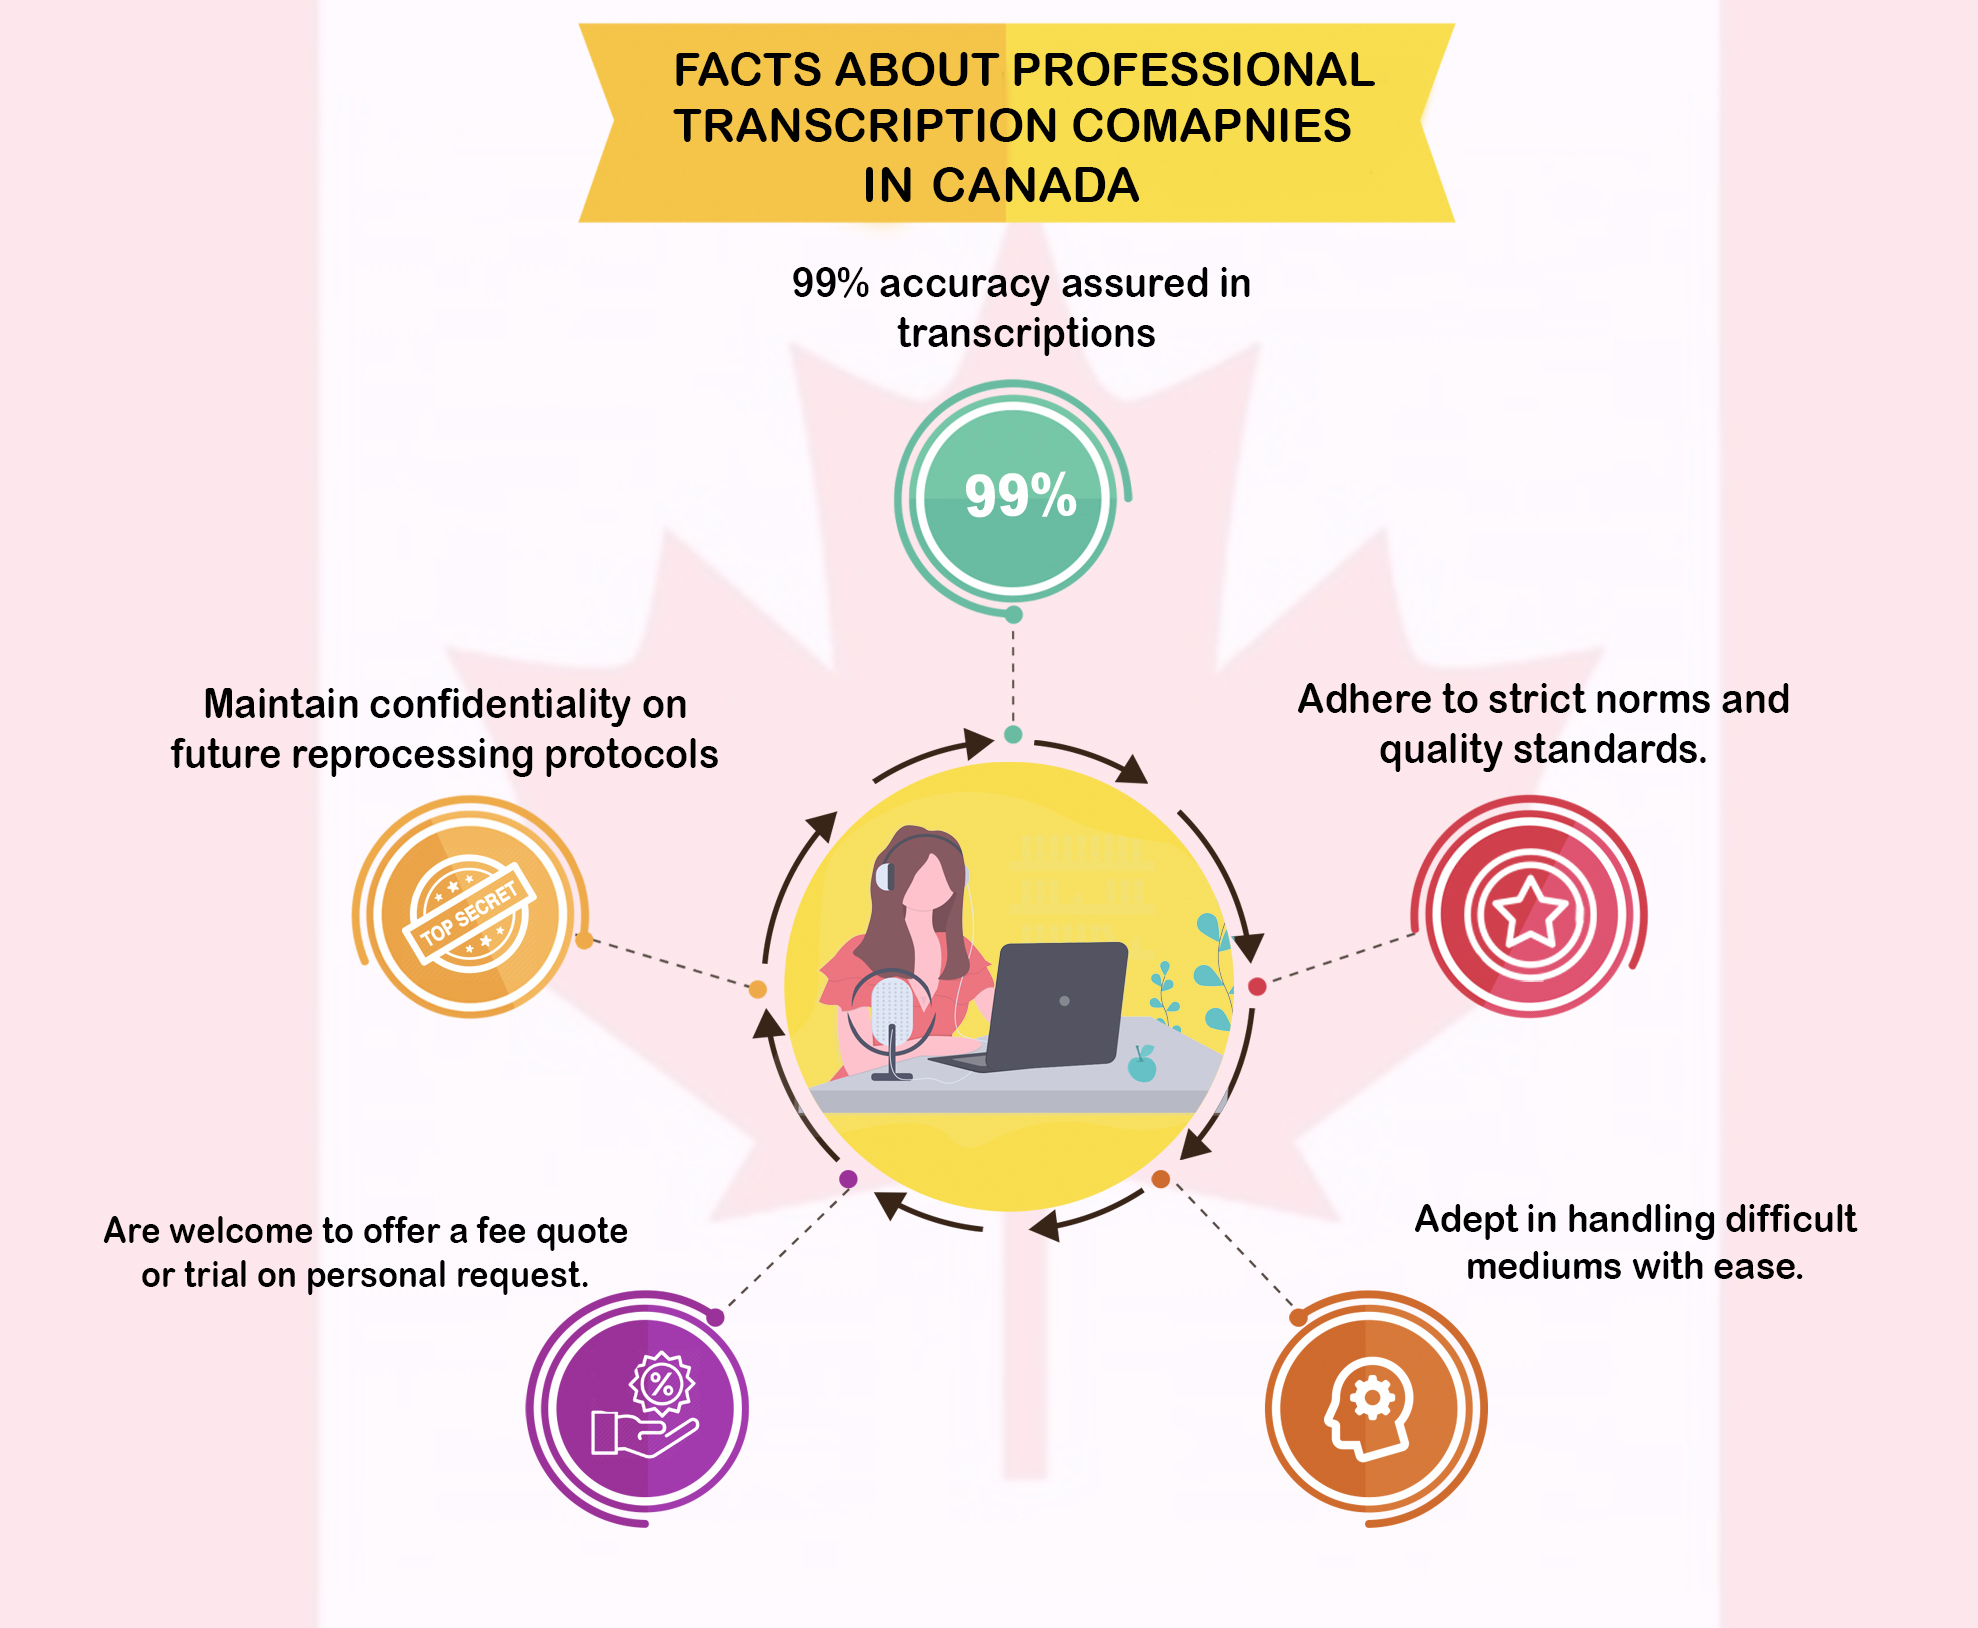 Facts About Professional Transcription Companies in Canada